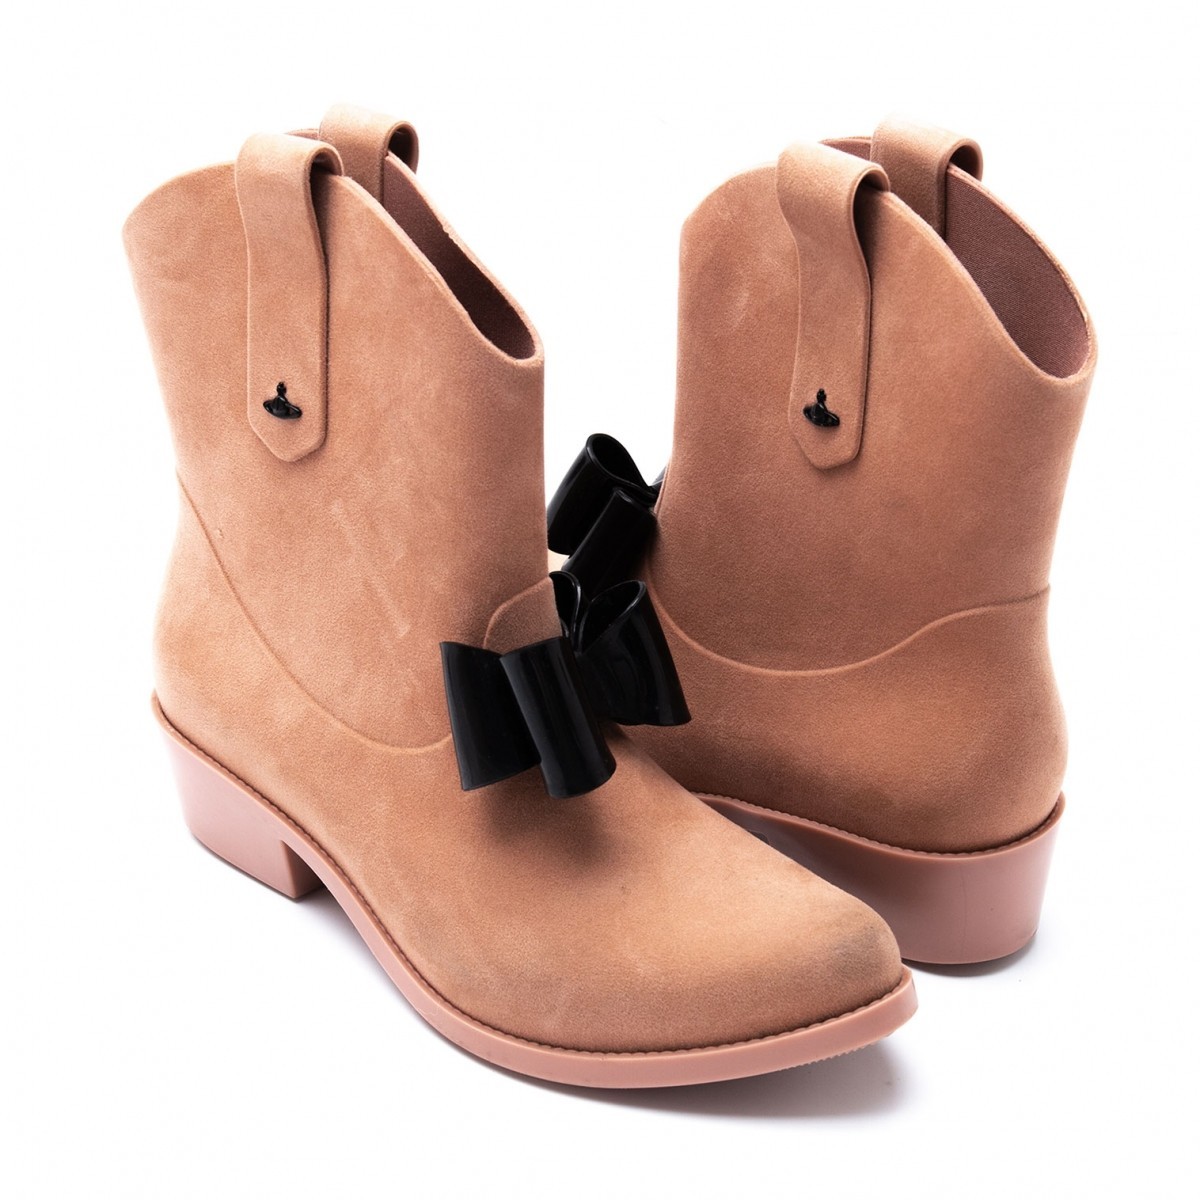 Vivian Westwood Anglomania x Melissa Sweed Boots Pink 22,5